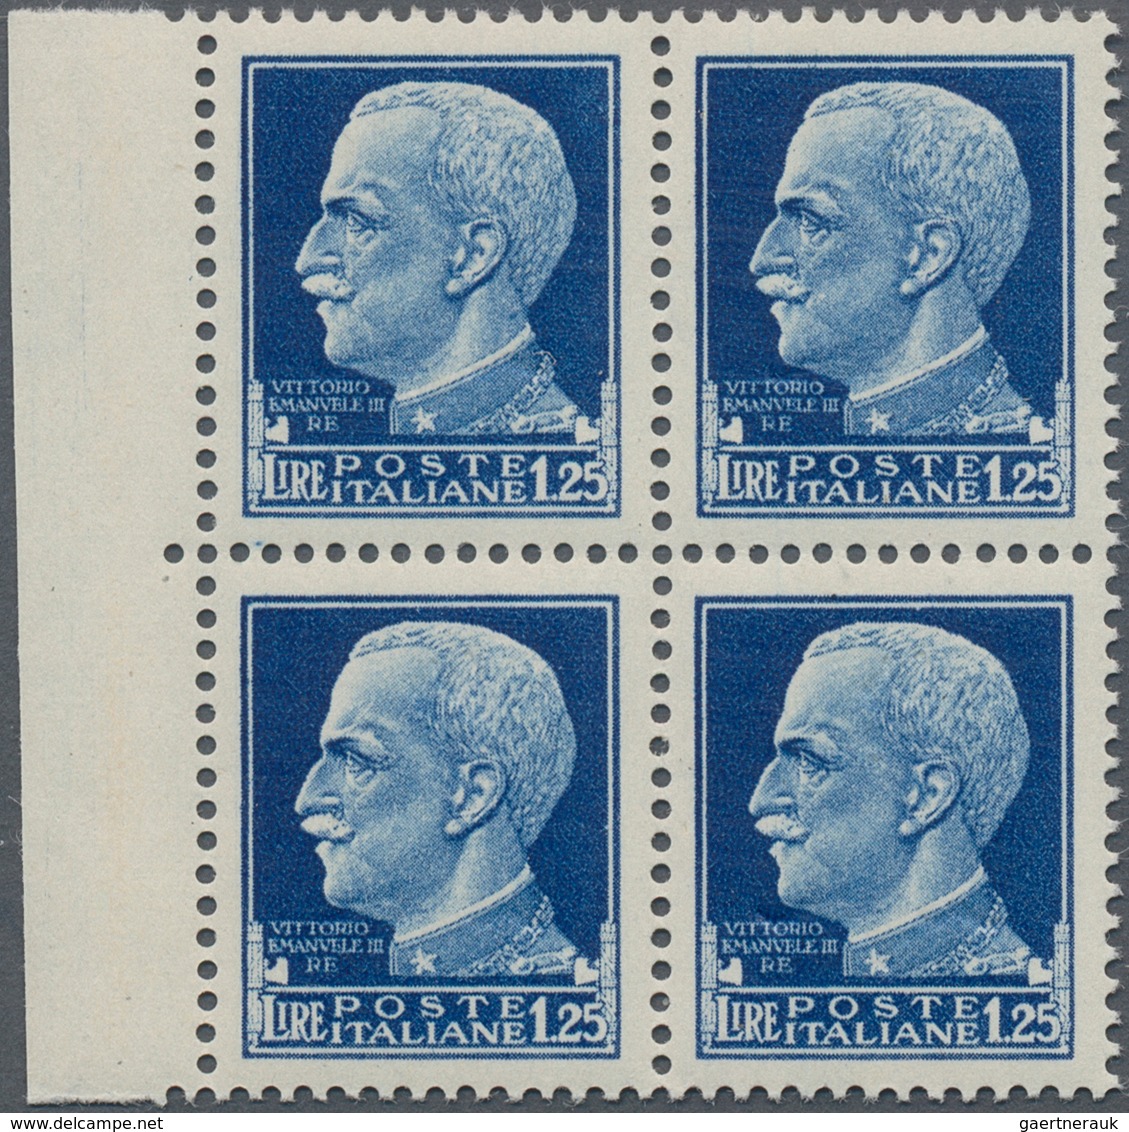 Italien: 1944, Rep.Sociale, Firenze Issue, 1.25l. Blue With Albino Print Of Fascies, Left Marginal B - Mint/hinged